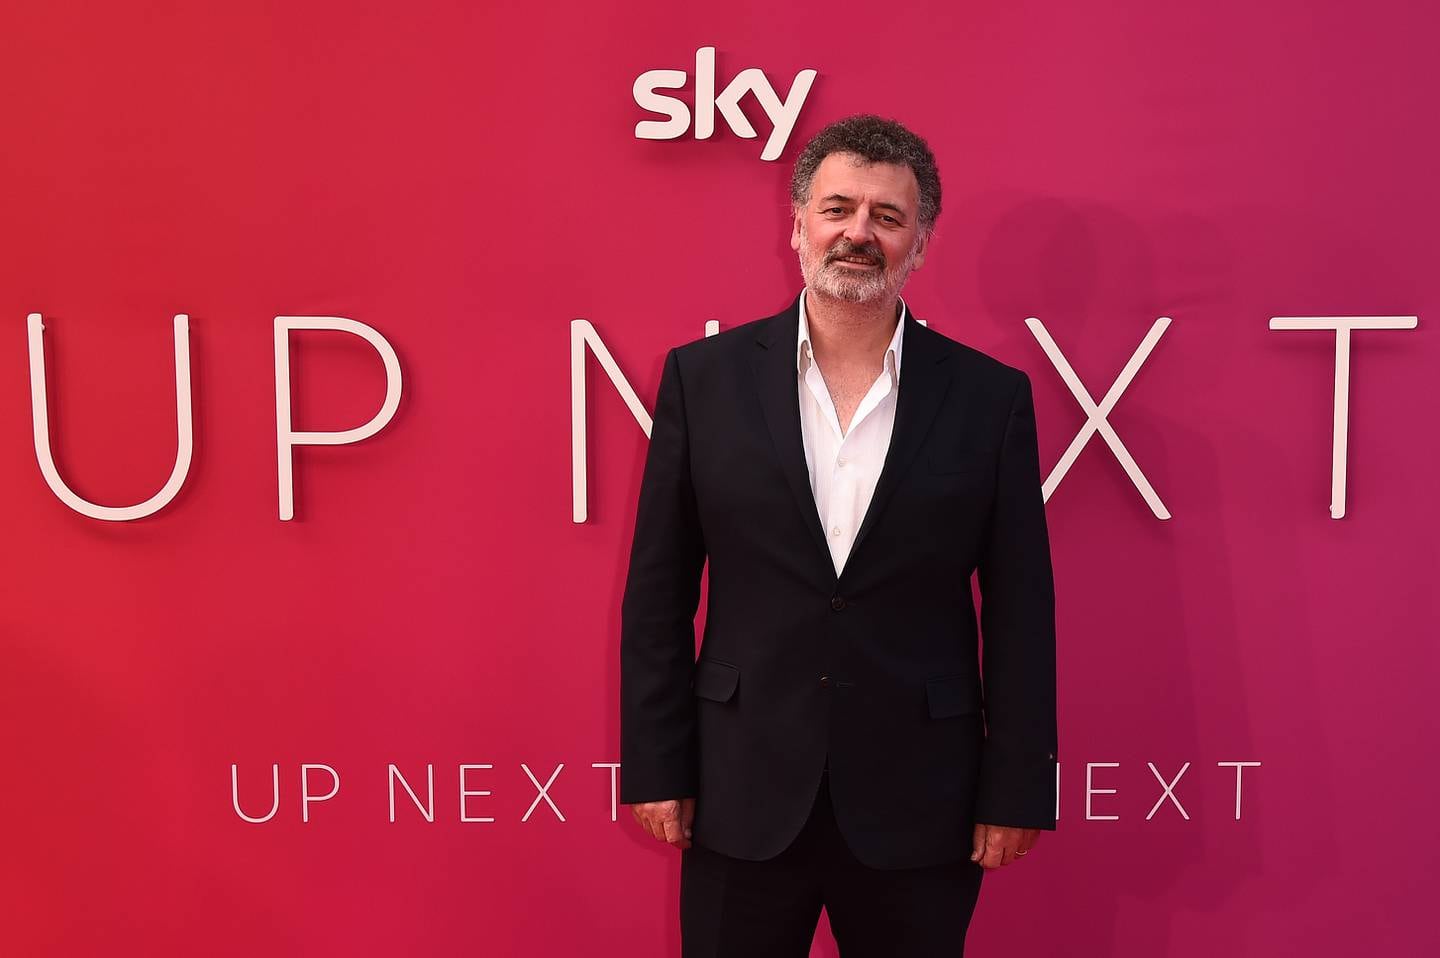 Steven Moffat, the creator and writer of 'The Time Traveler's Wife'. Getty Images